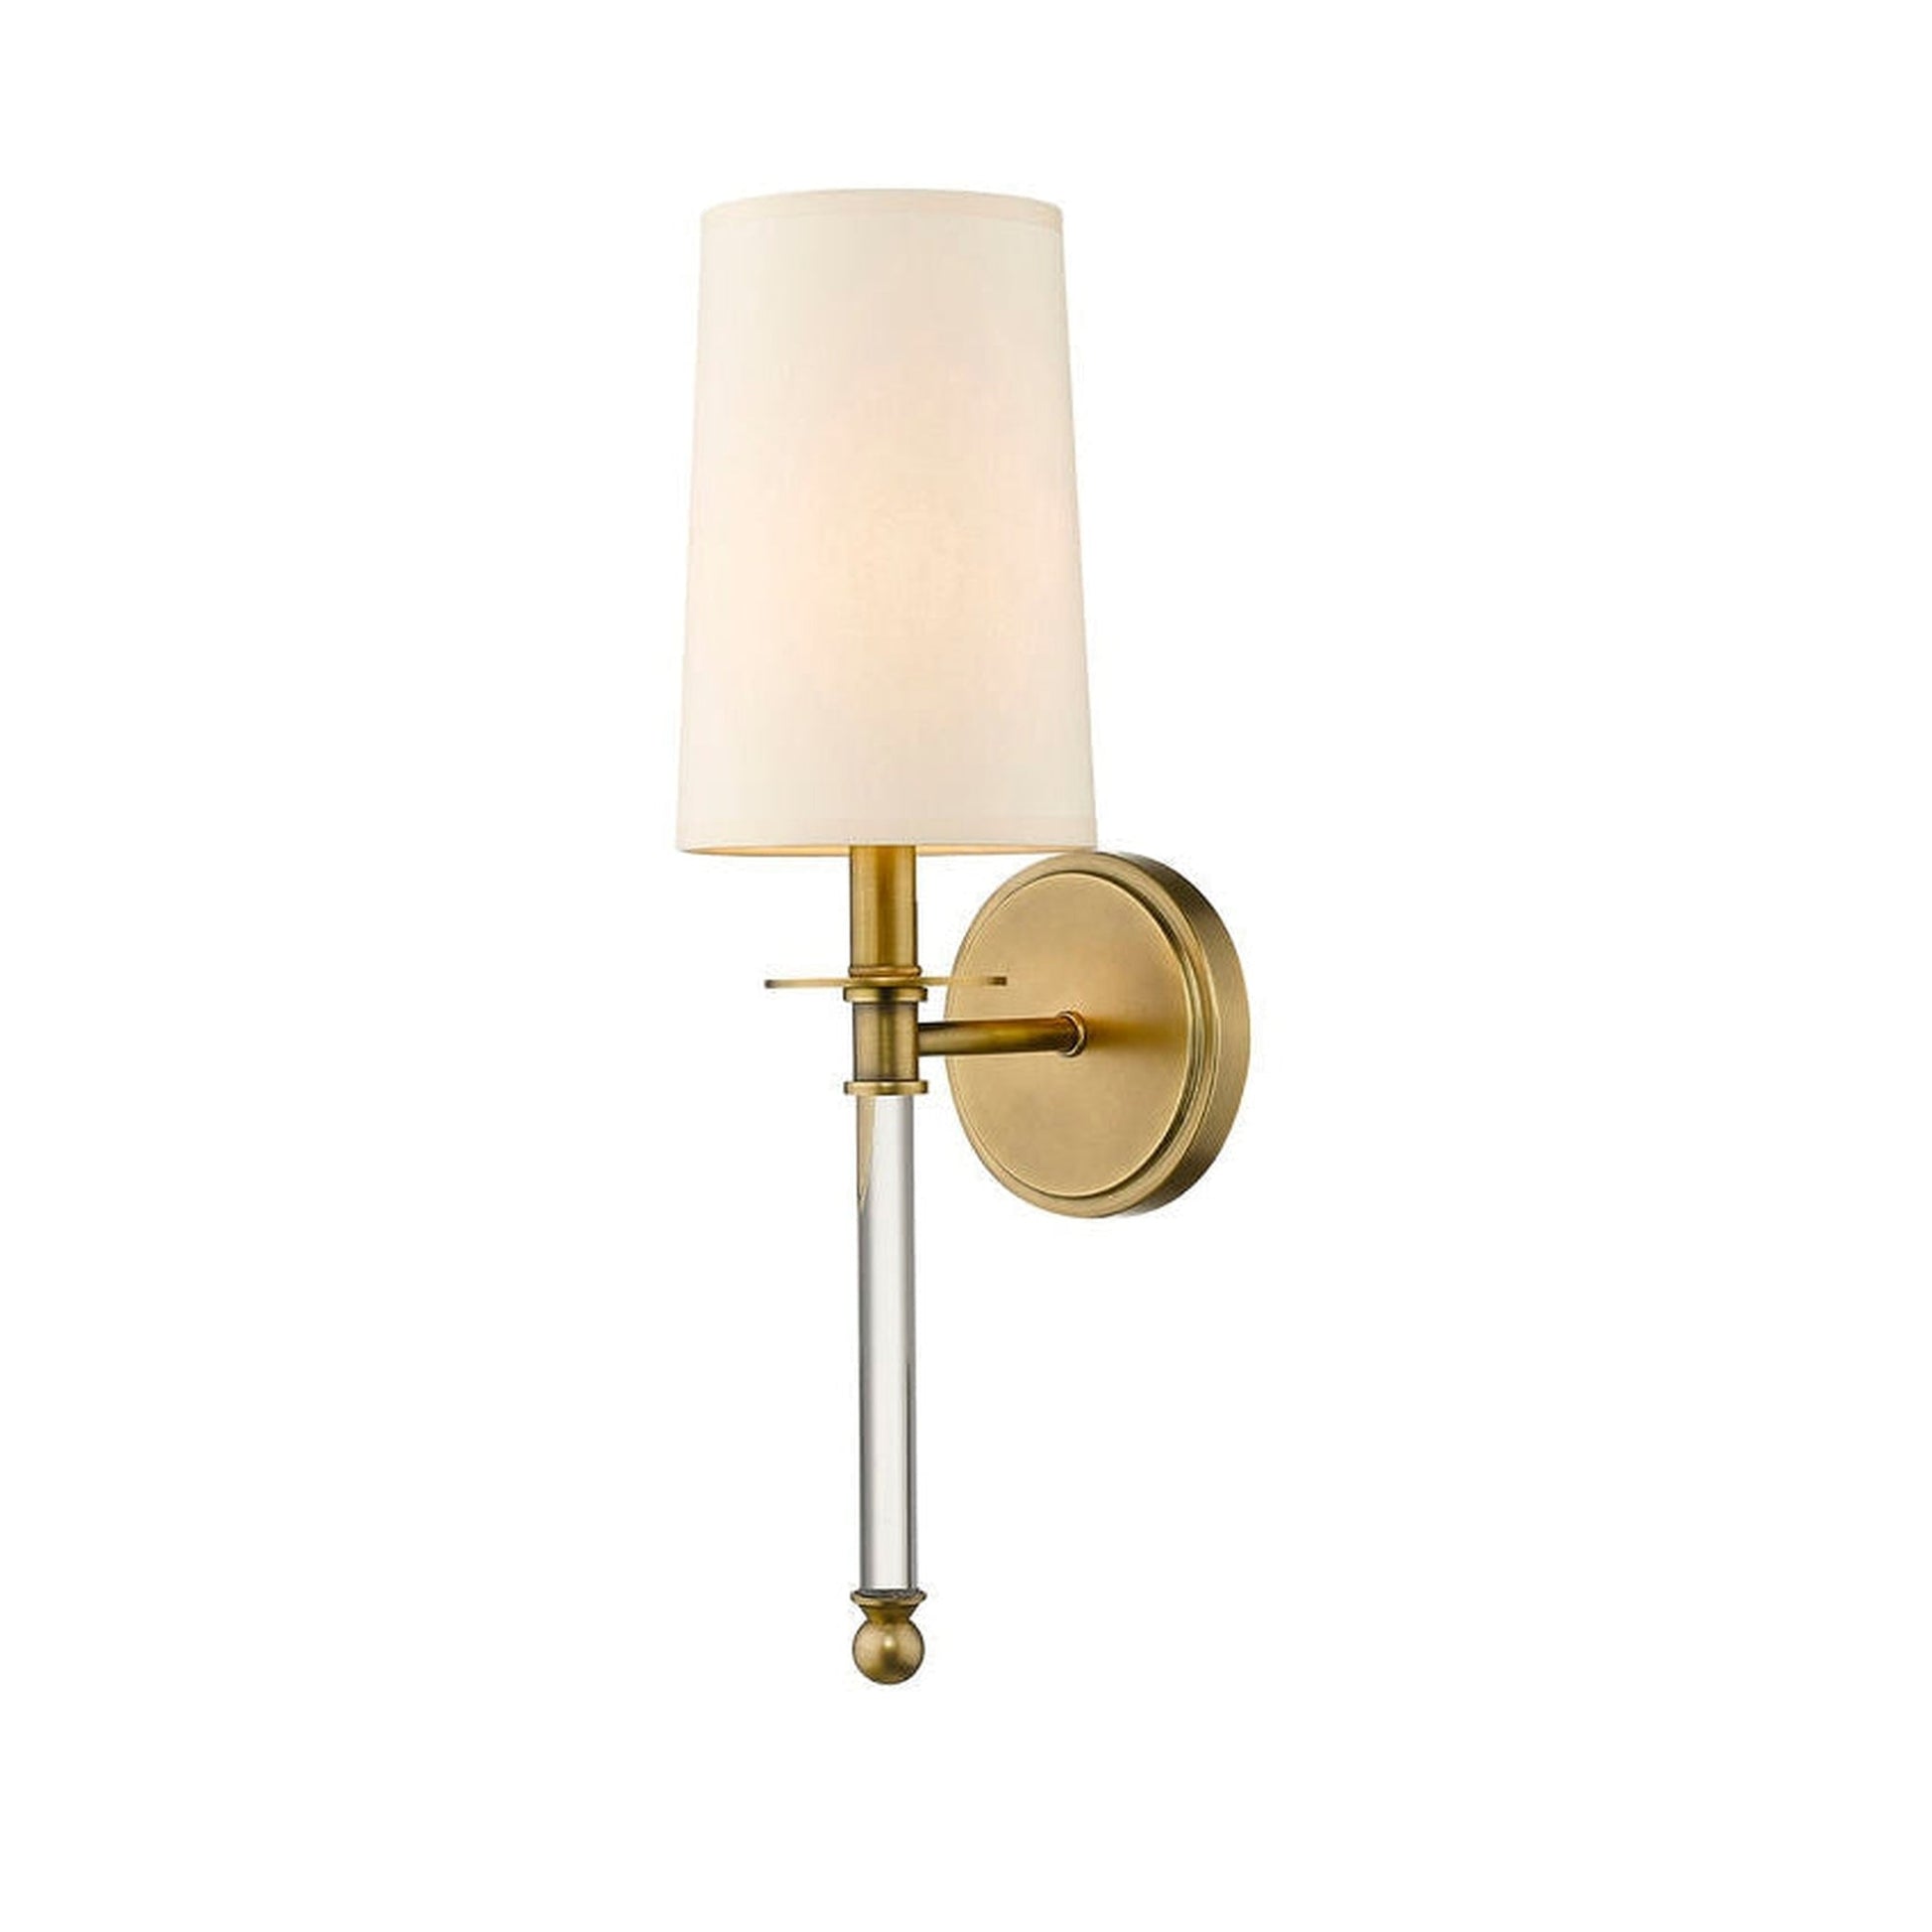 Z-Lite Mila 6" 1-Light Rubbed Brass Wall Sconce With Beige Parchment Paper Shade